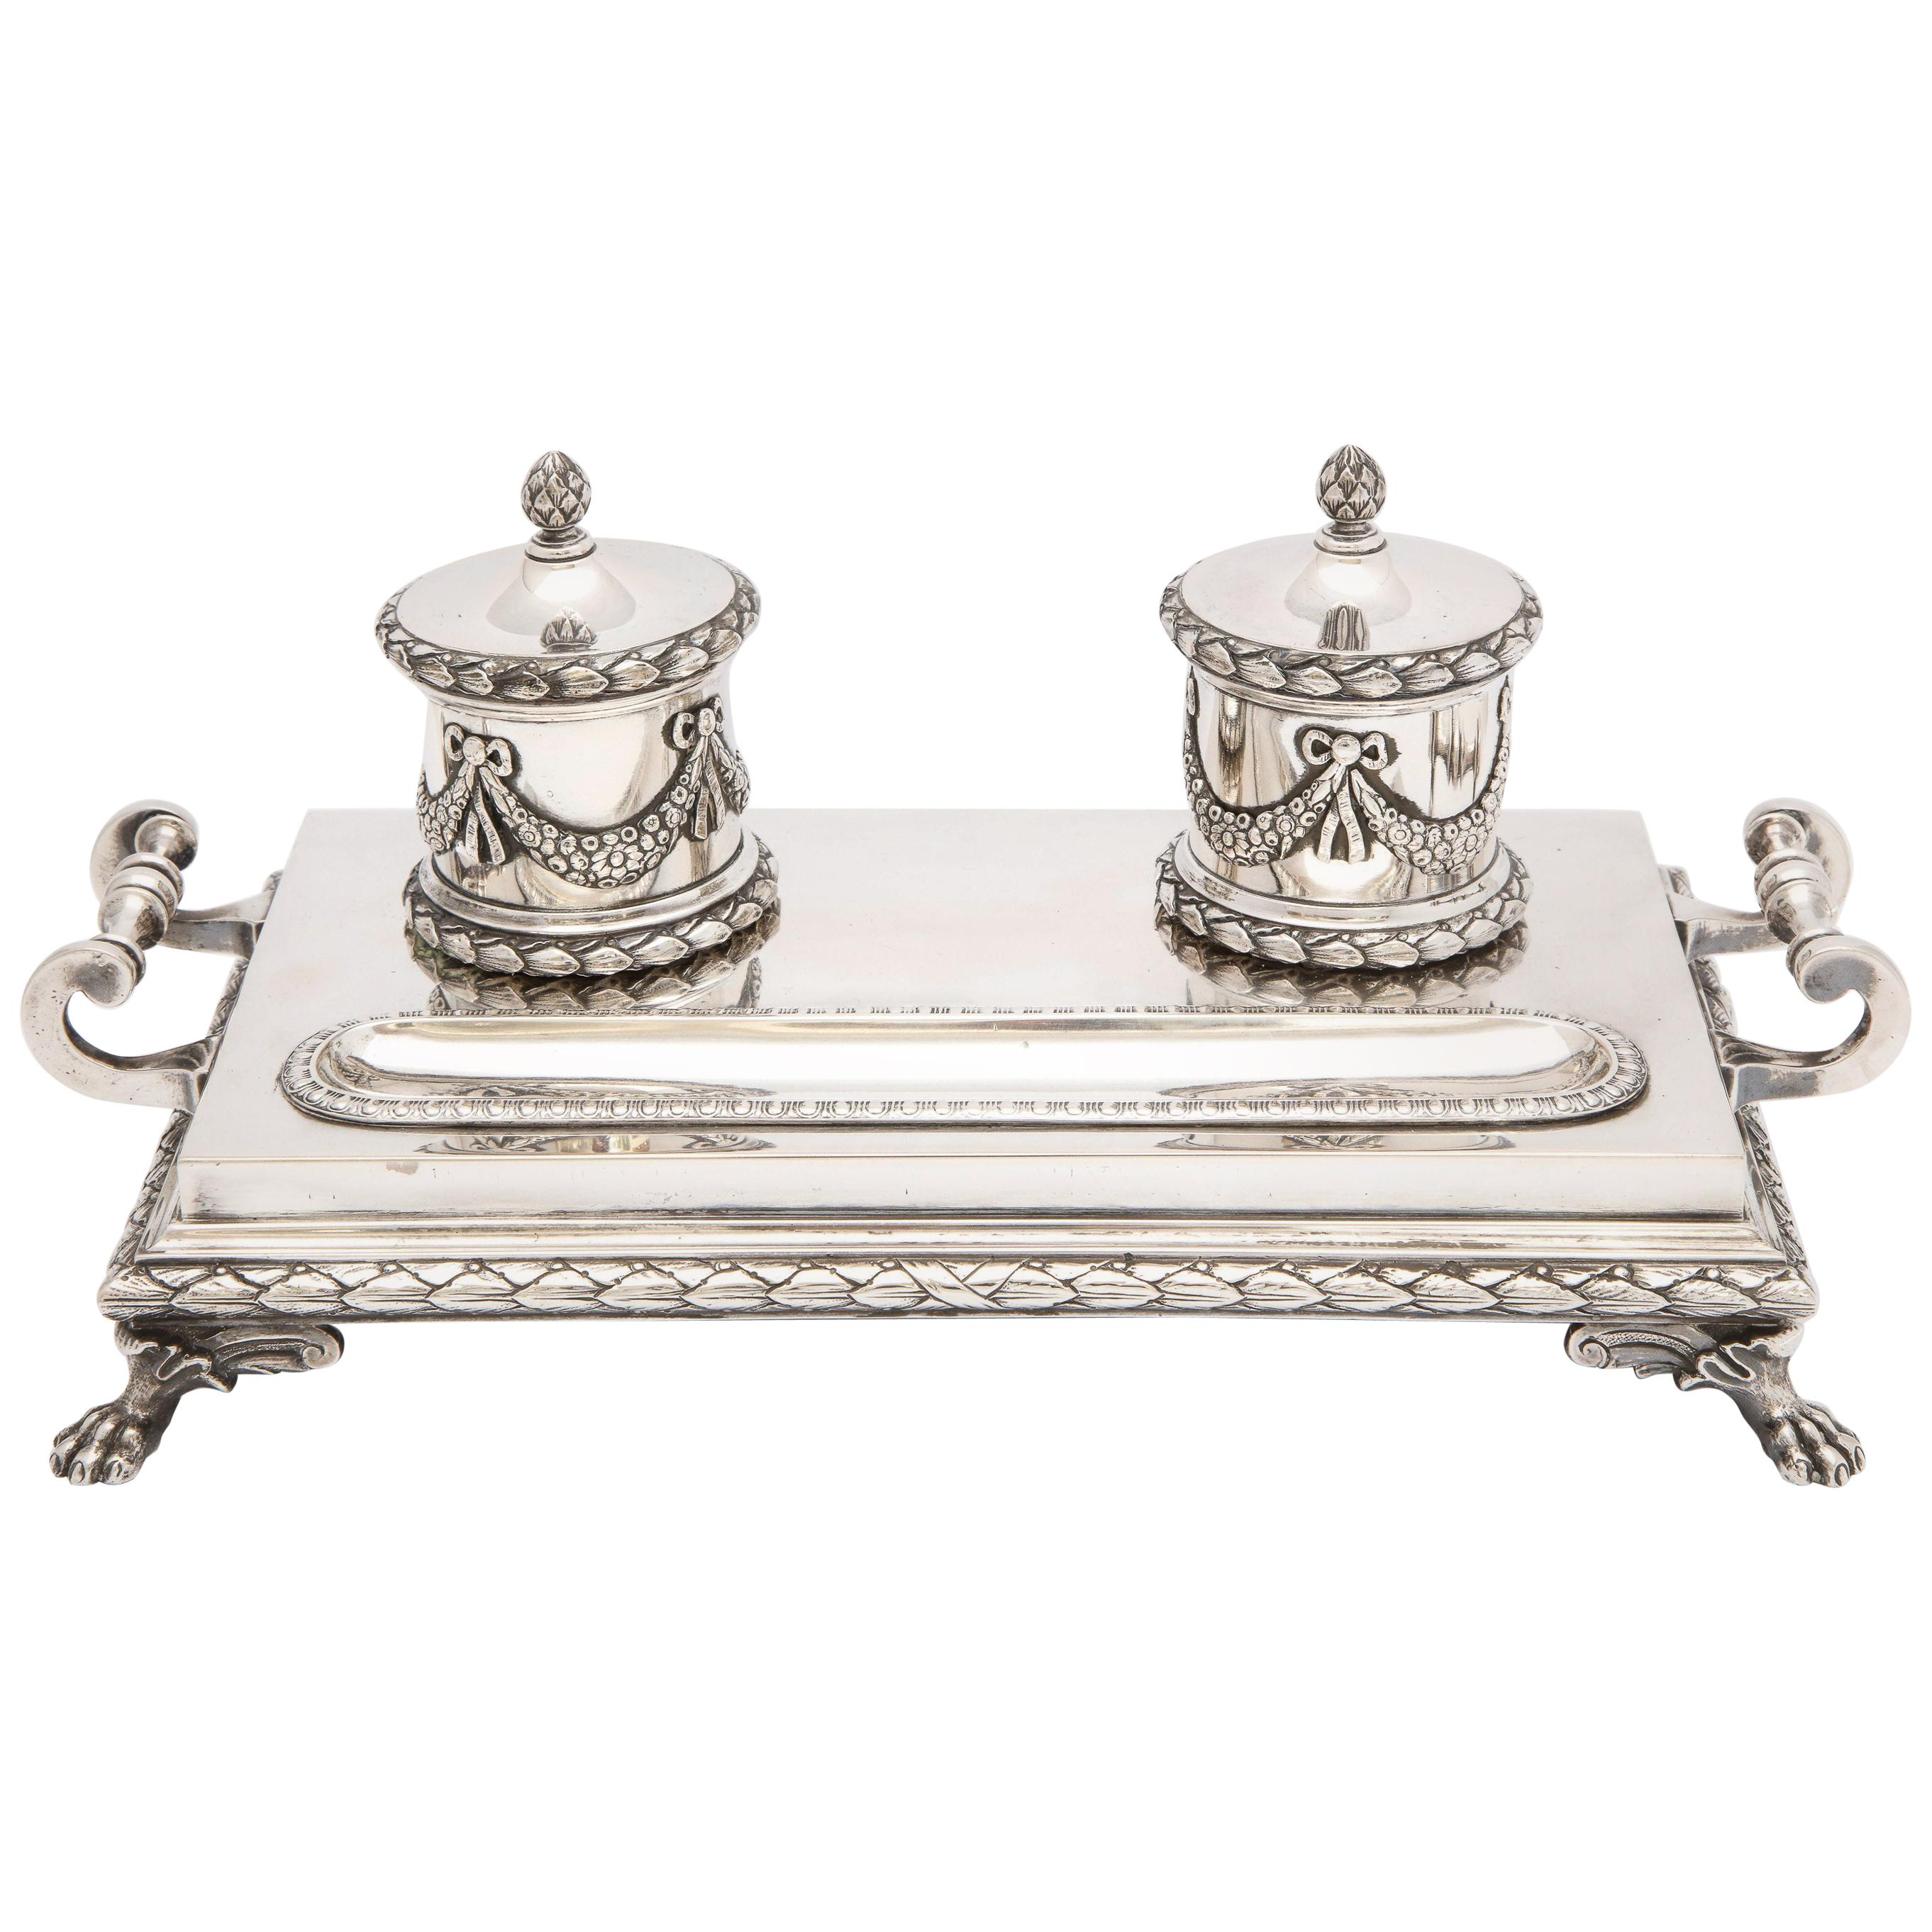 Neoclassical-Style Continental Silver '.800' Footed Double Inkstand by Dragstead